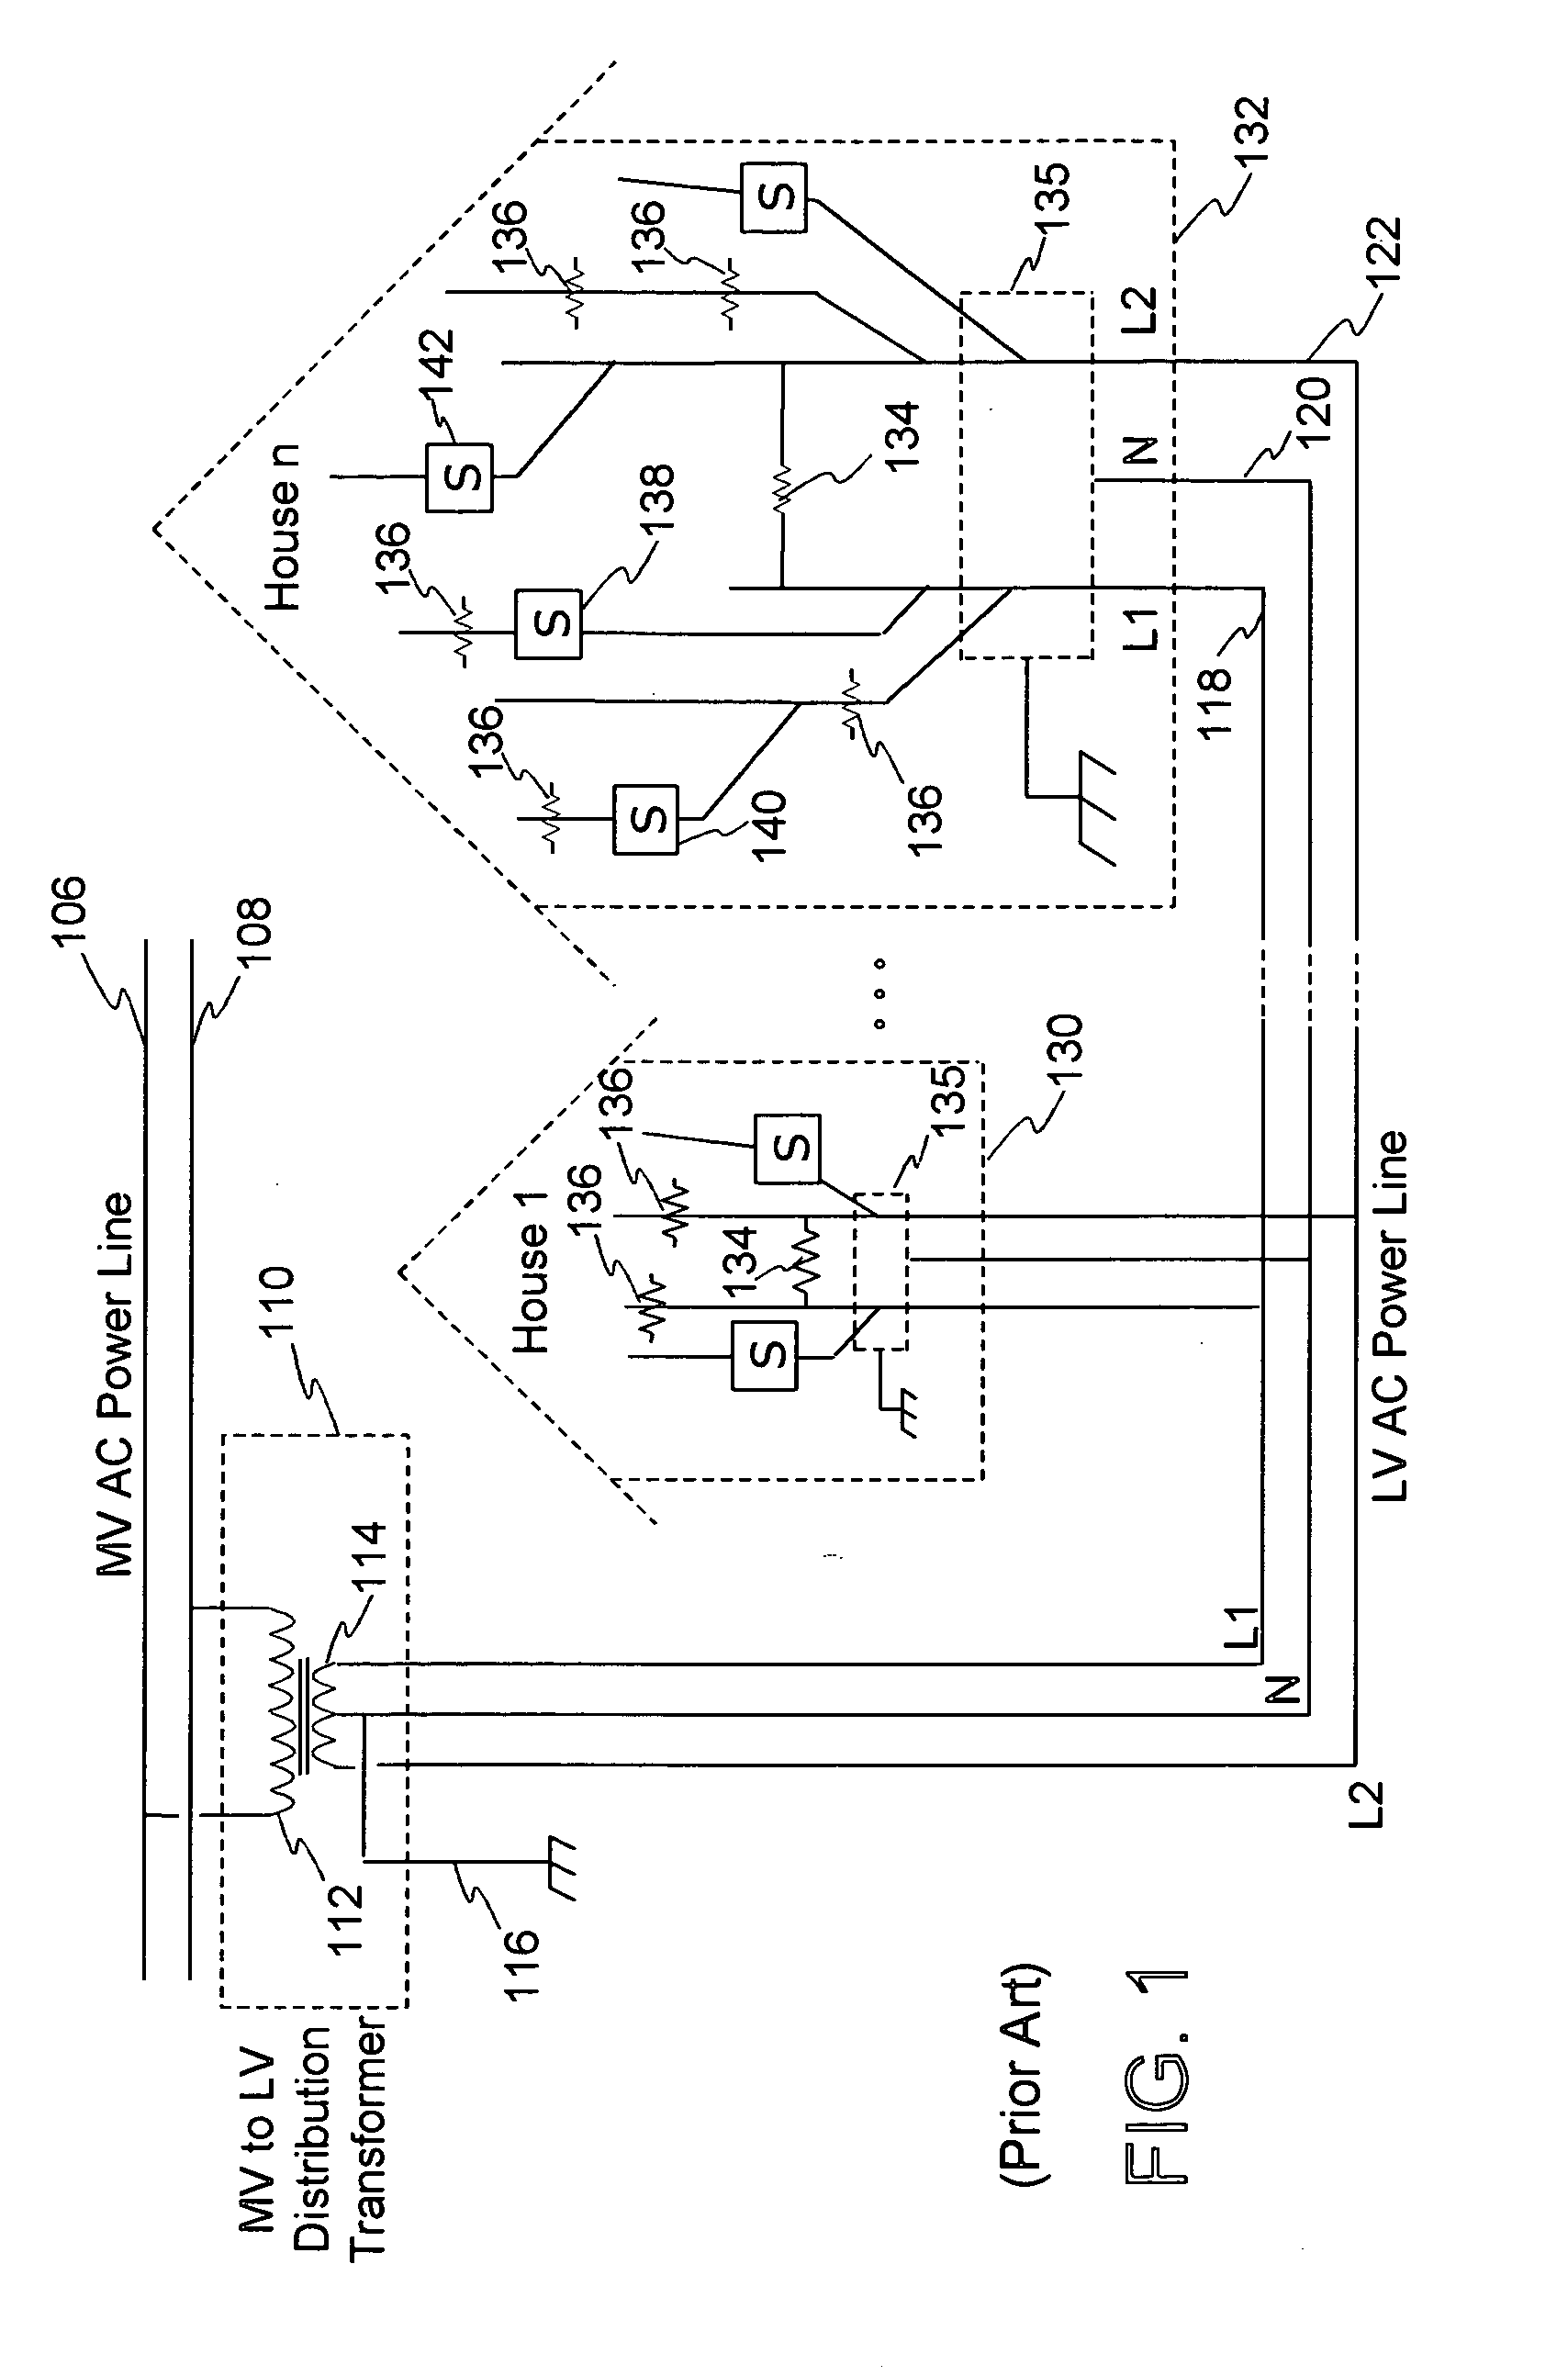 Method and apparatus for providing broadband wireless access services using the low voltage power line